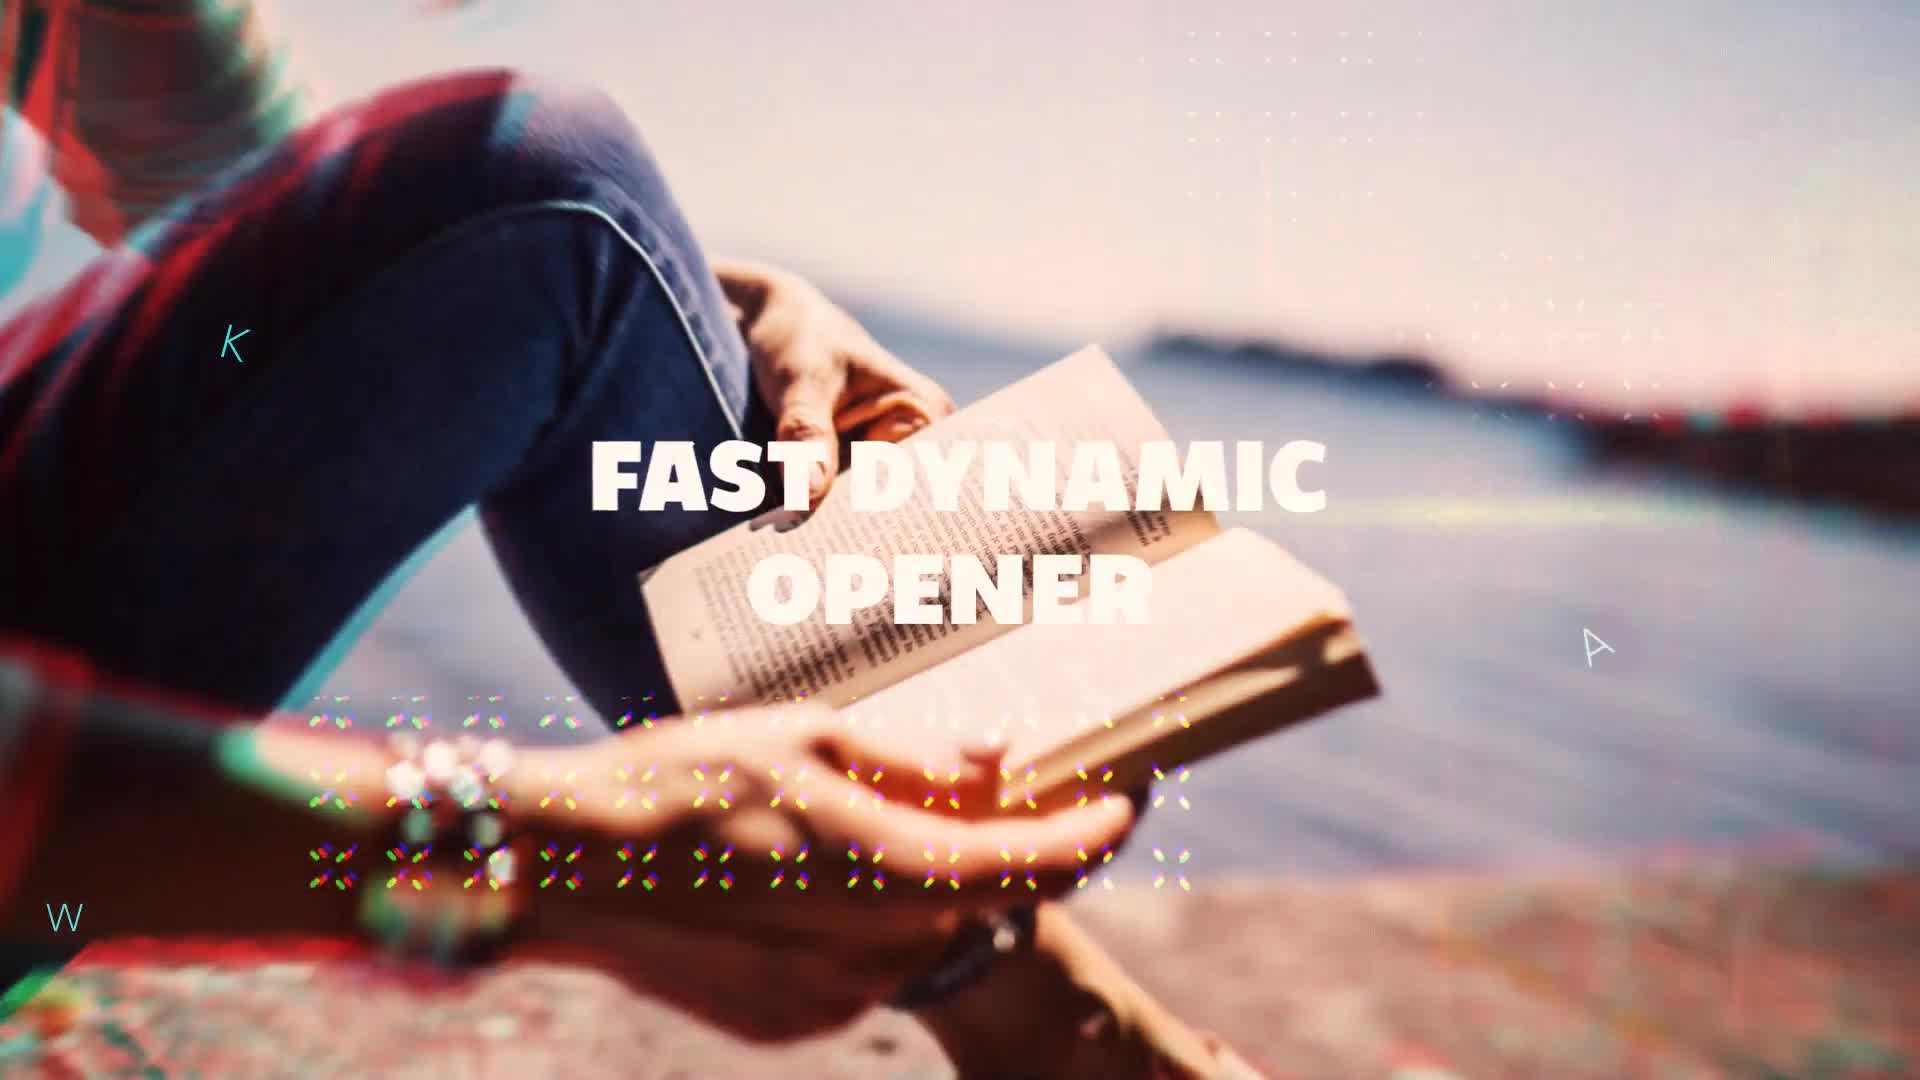 Fast Dynamic Opener - Download Videohive 19978799